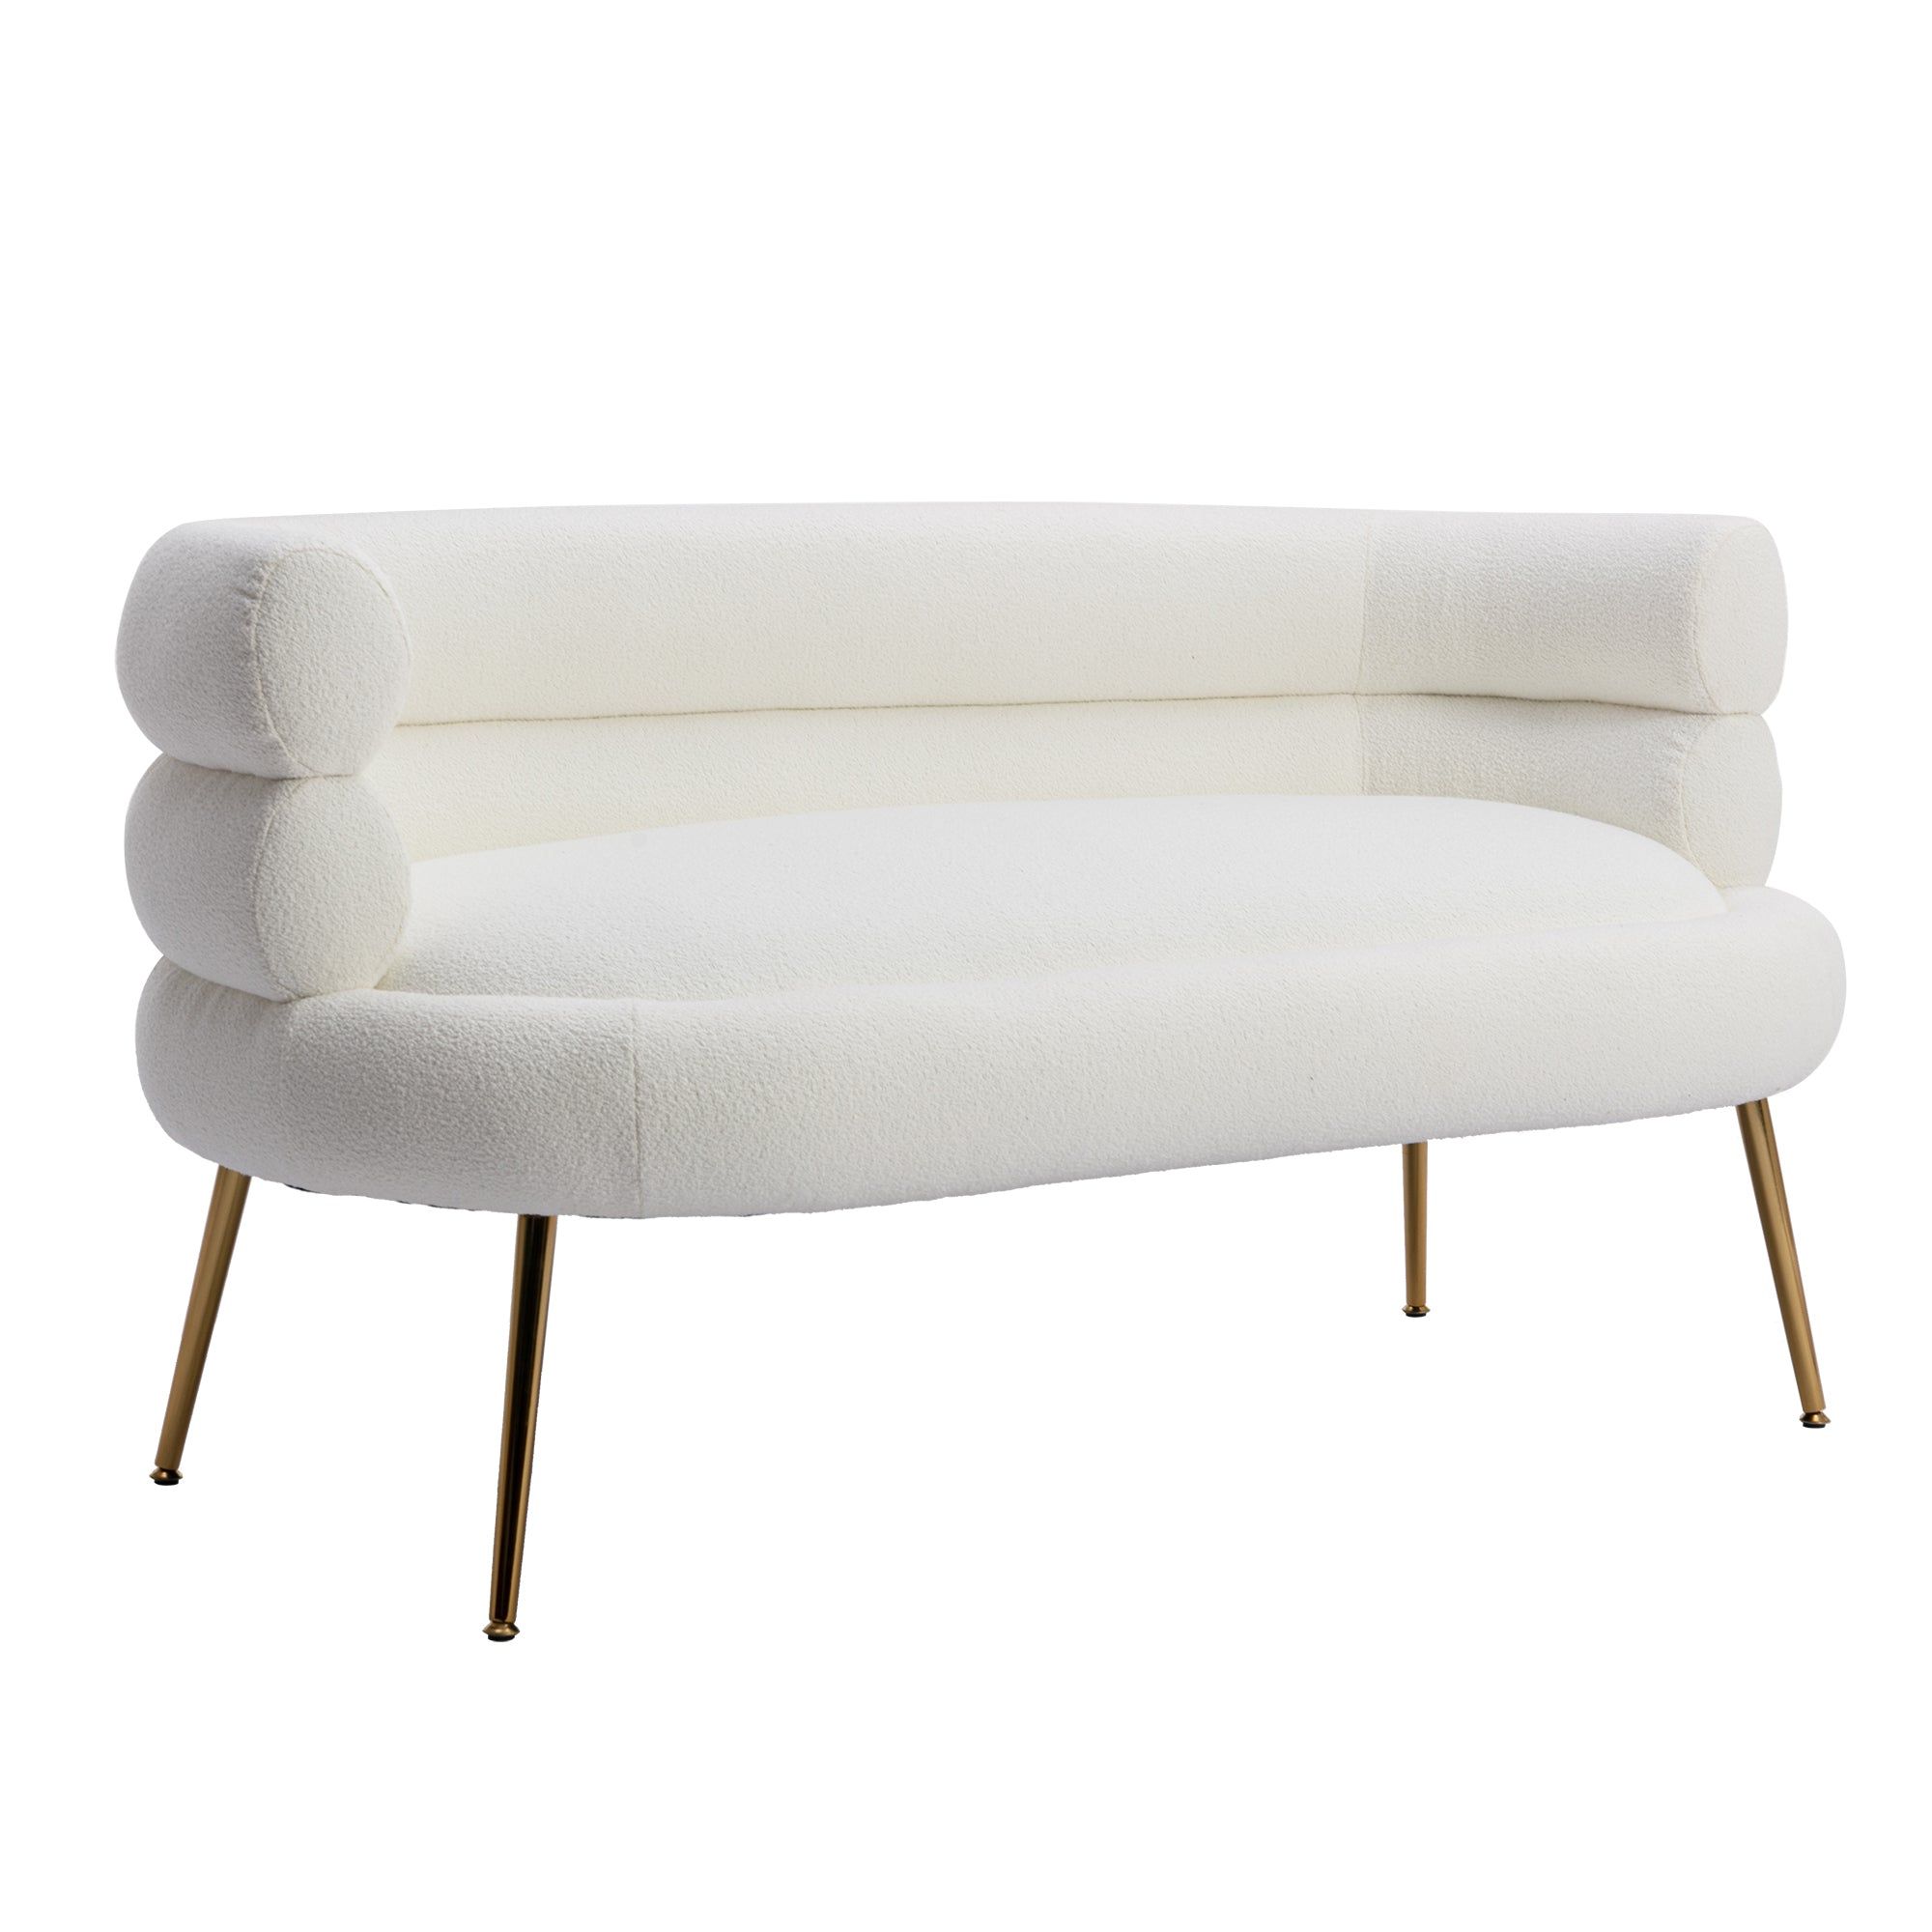 COOLMORE Accent Chair Leisure Sofa